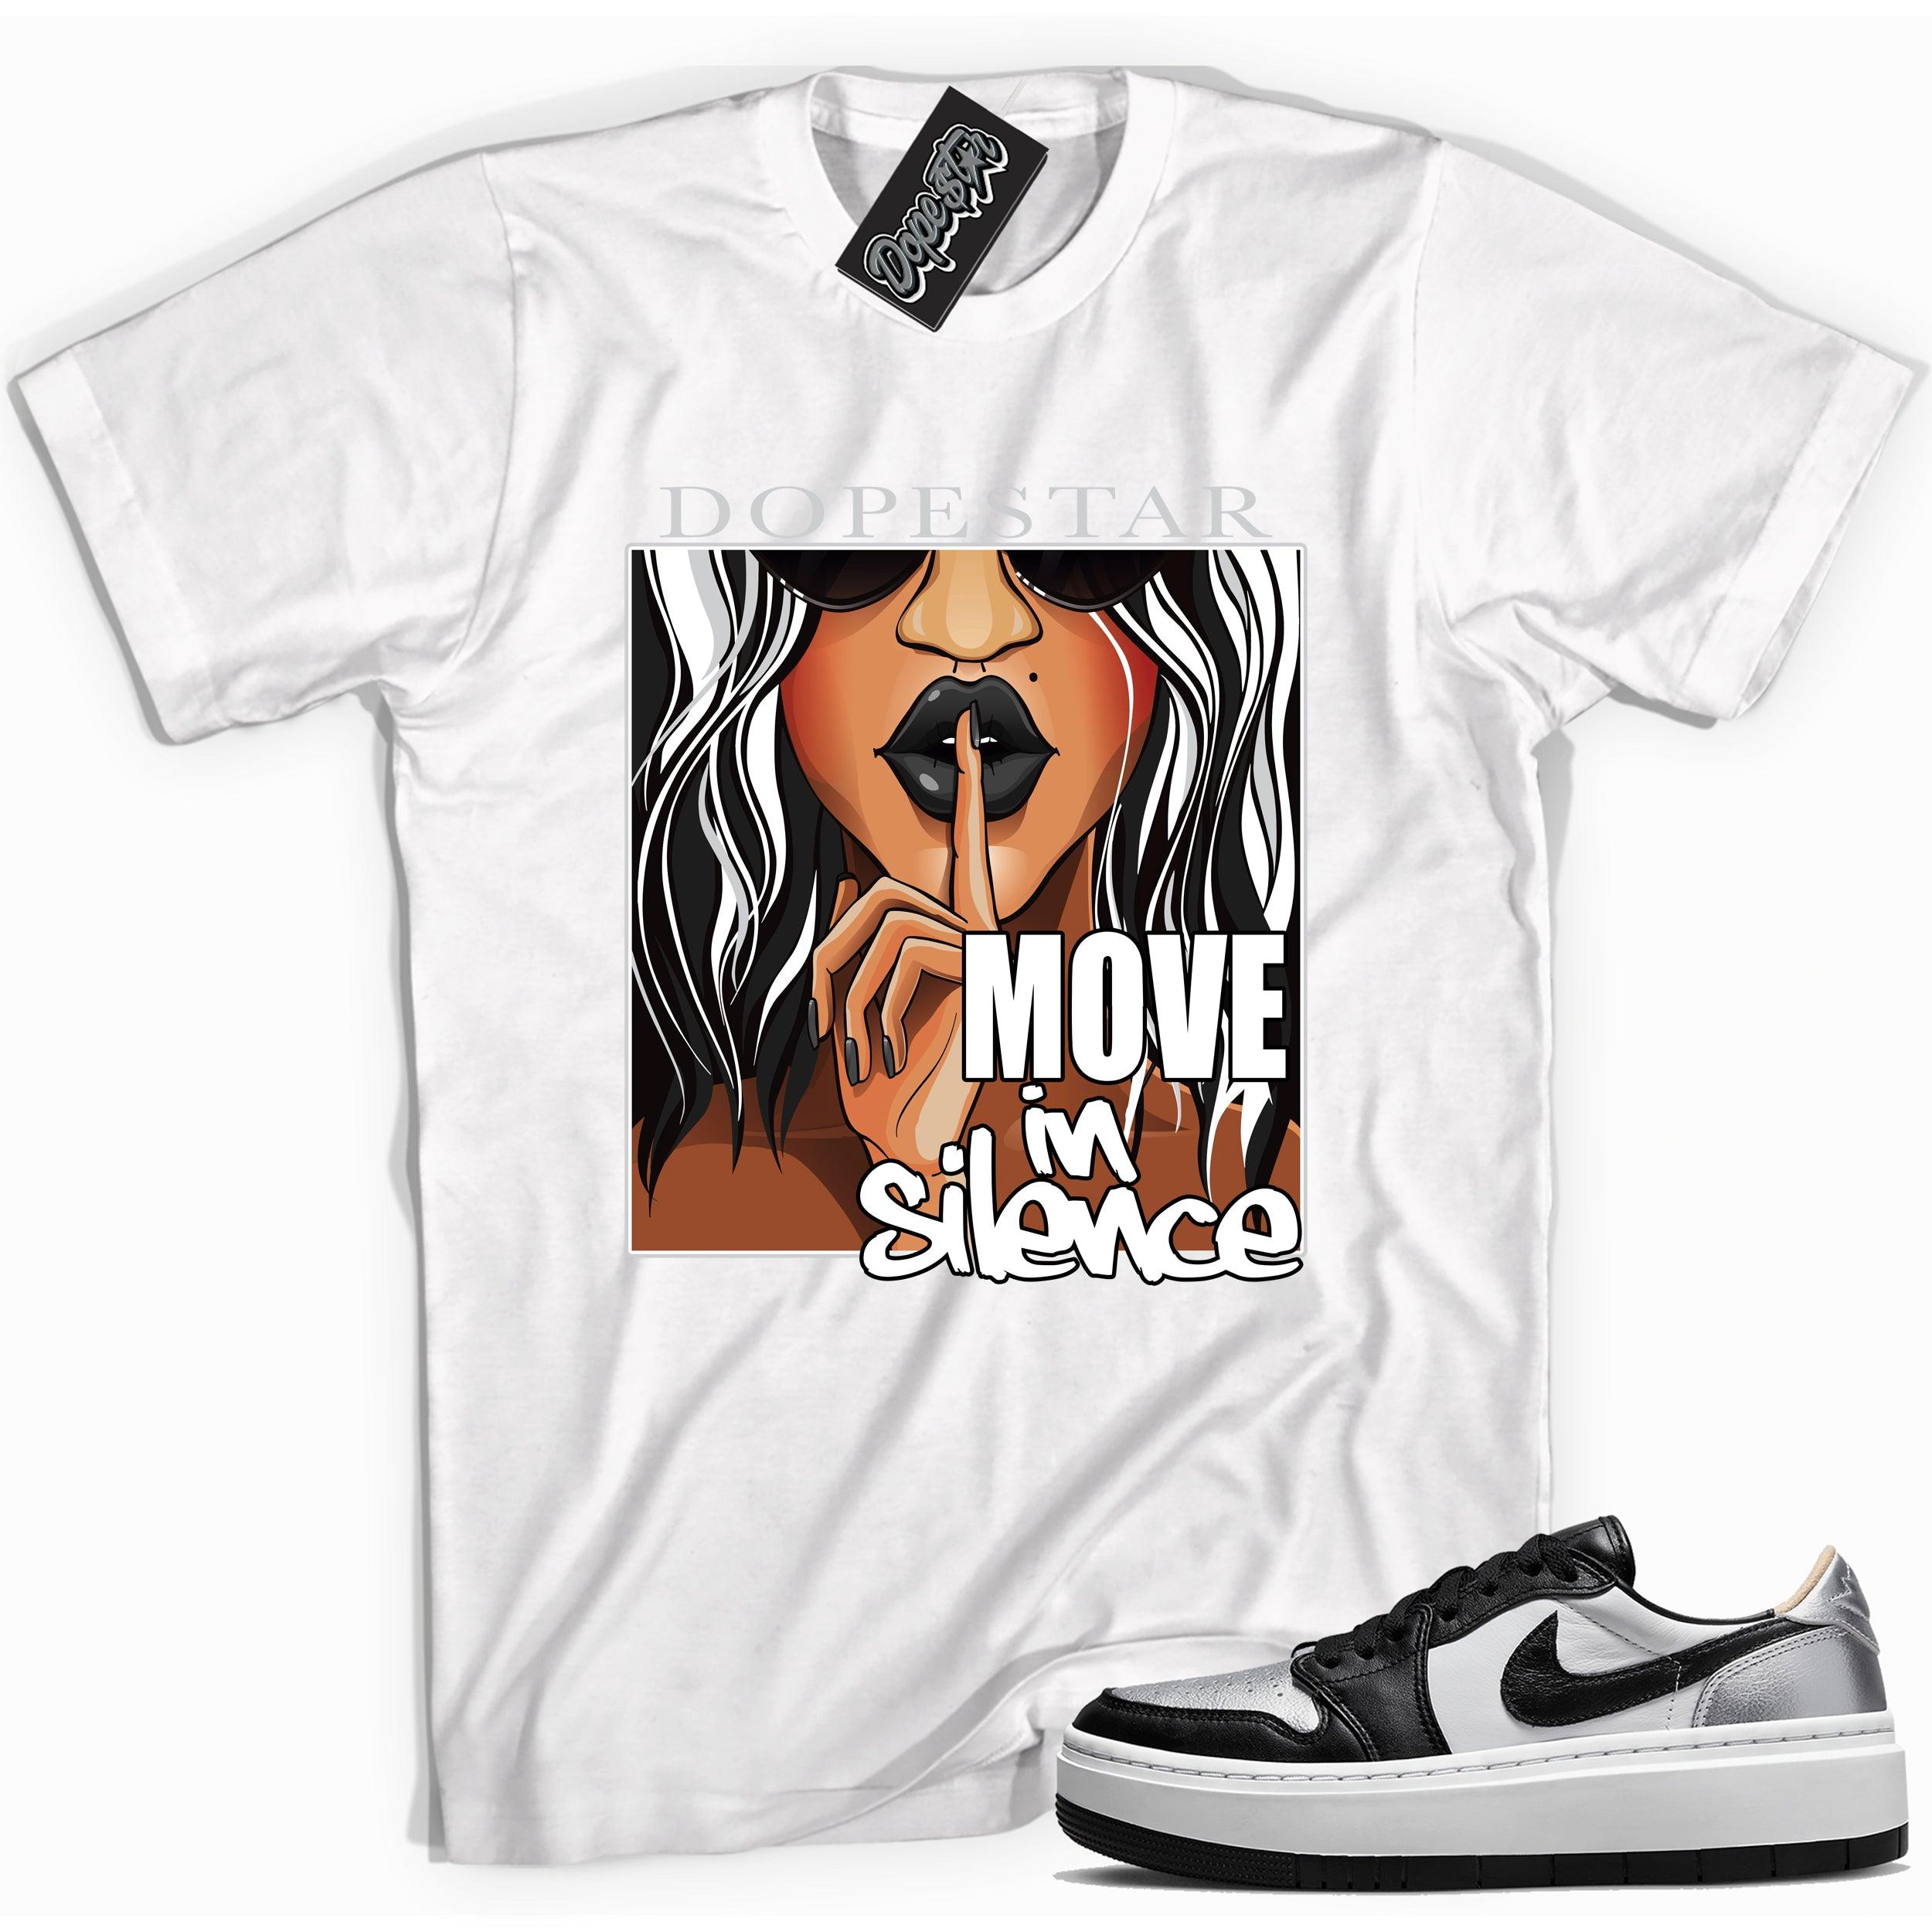 Cool white graphic tee with 'move in silence' print, that perfectly matches Air Jordan 1 Elevate Low SE Silver Toe sneakers.